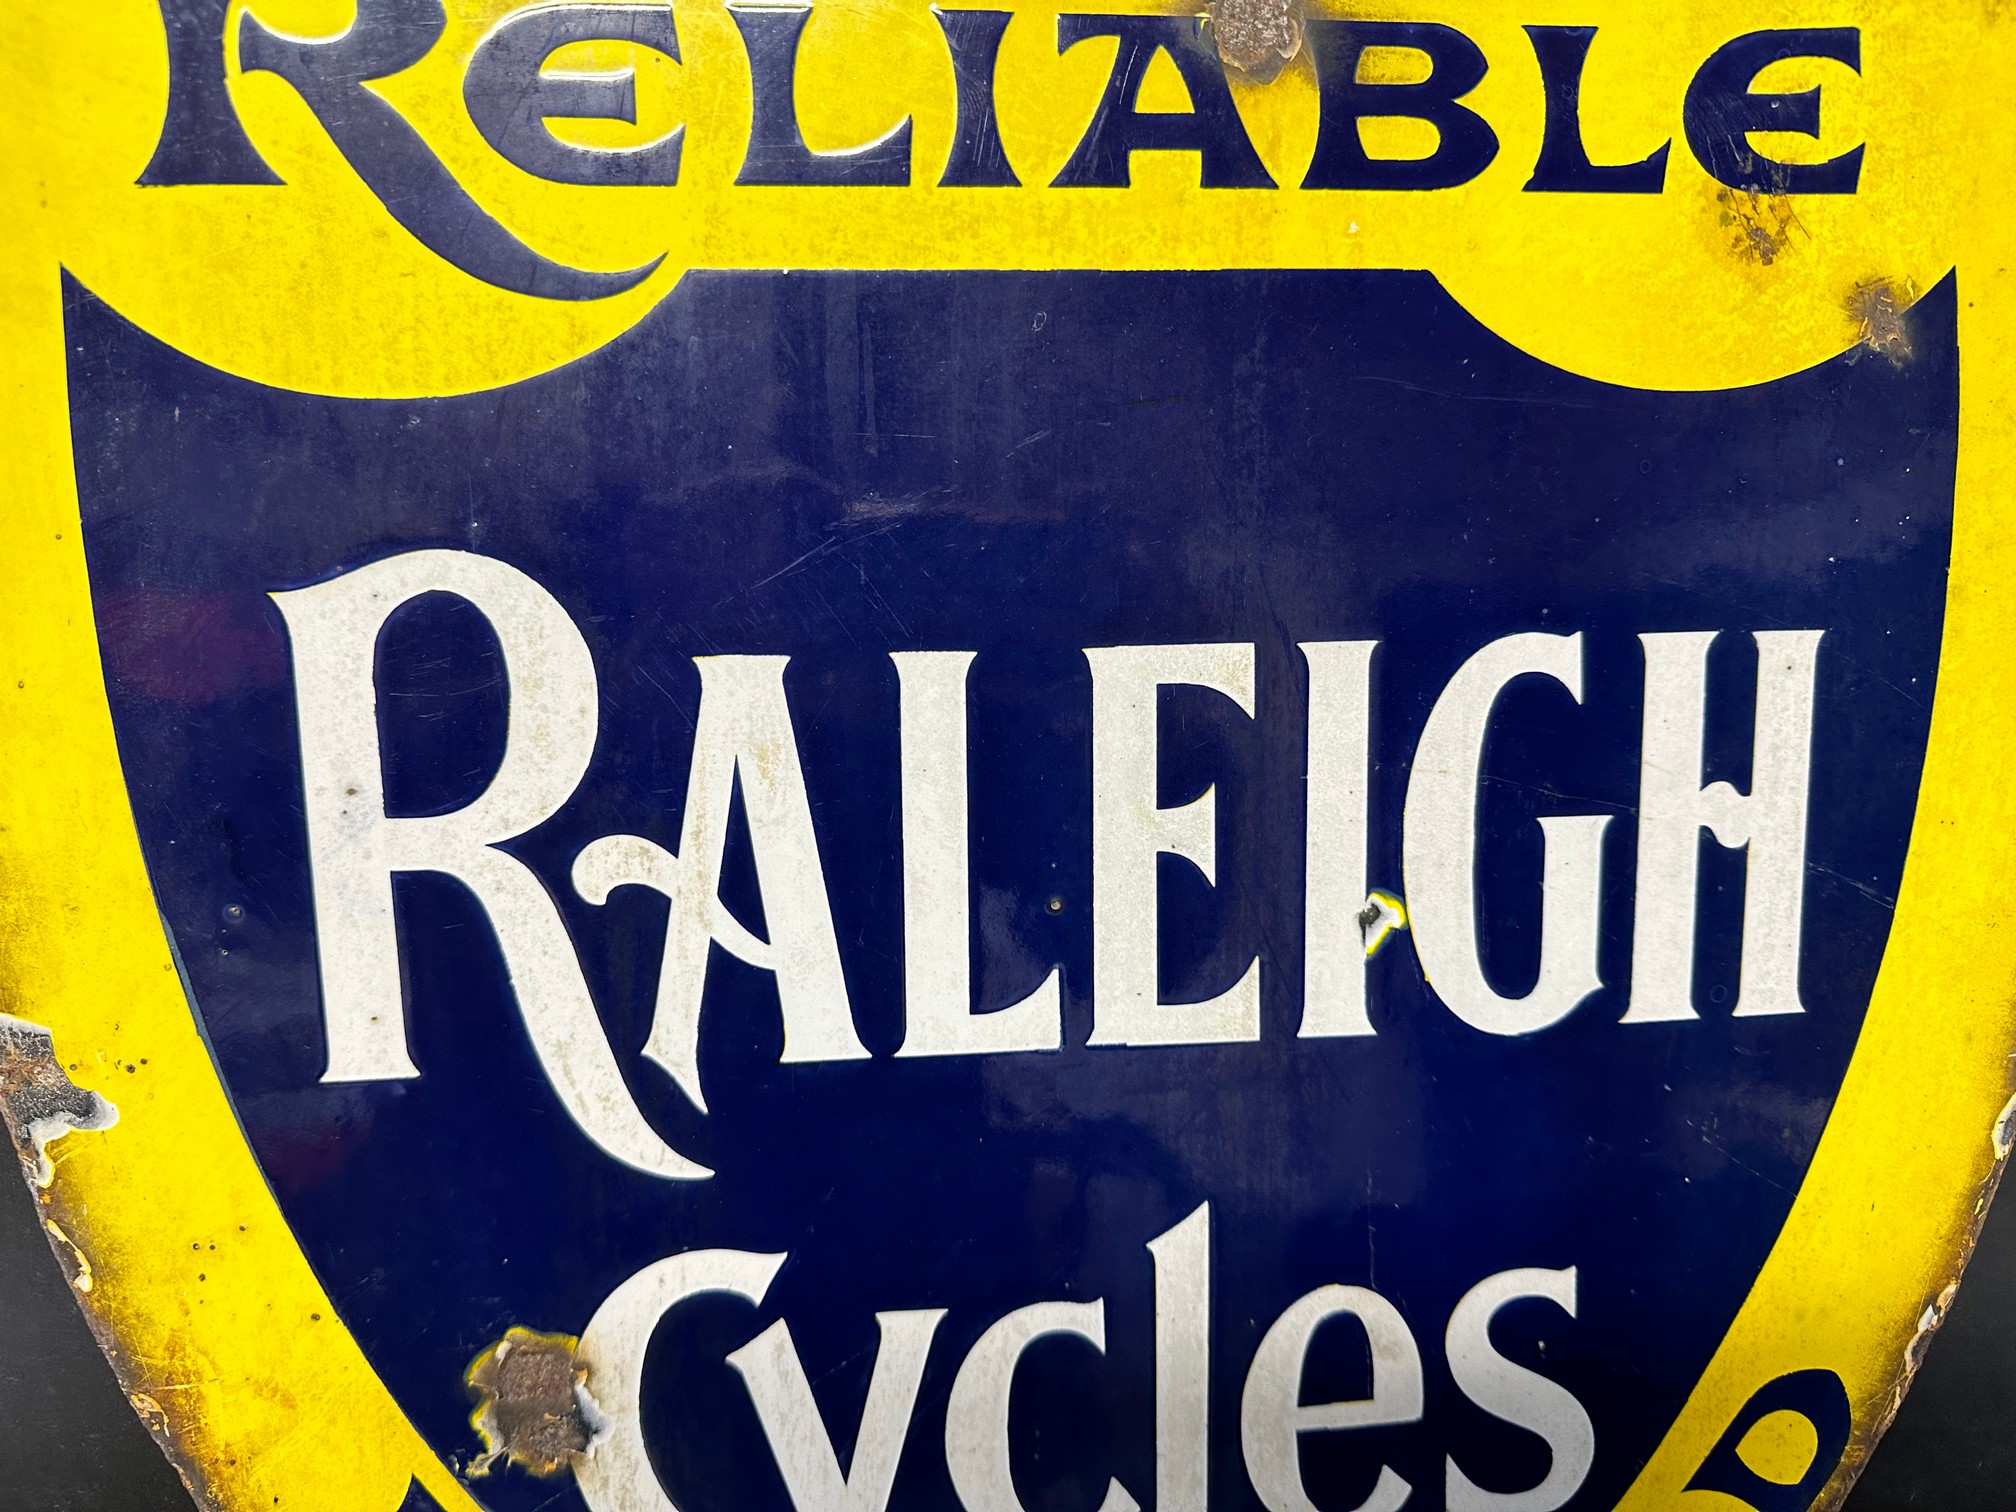 A Raleigh Cycles - Reliable, Rigid Rapid shield-shaped double sided enamel advertising sign, 17 3/ - Image 4 of 6